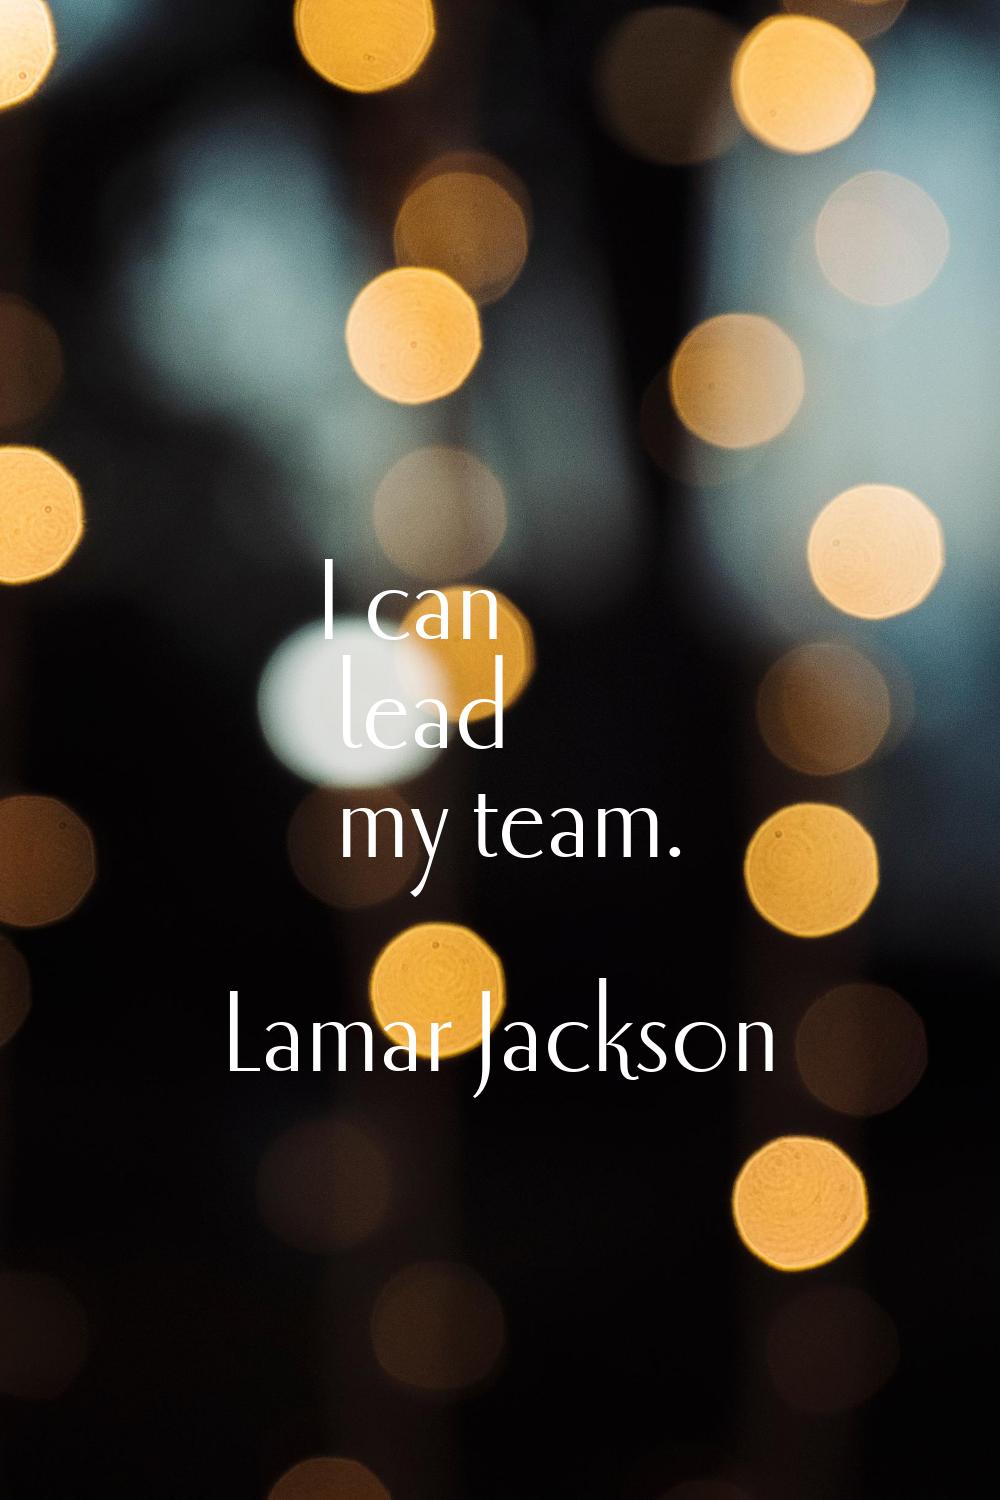 I can lead my team.